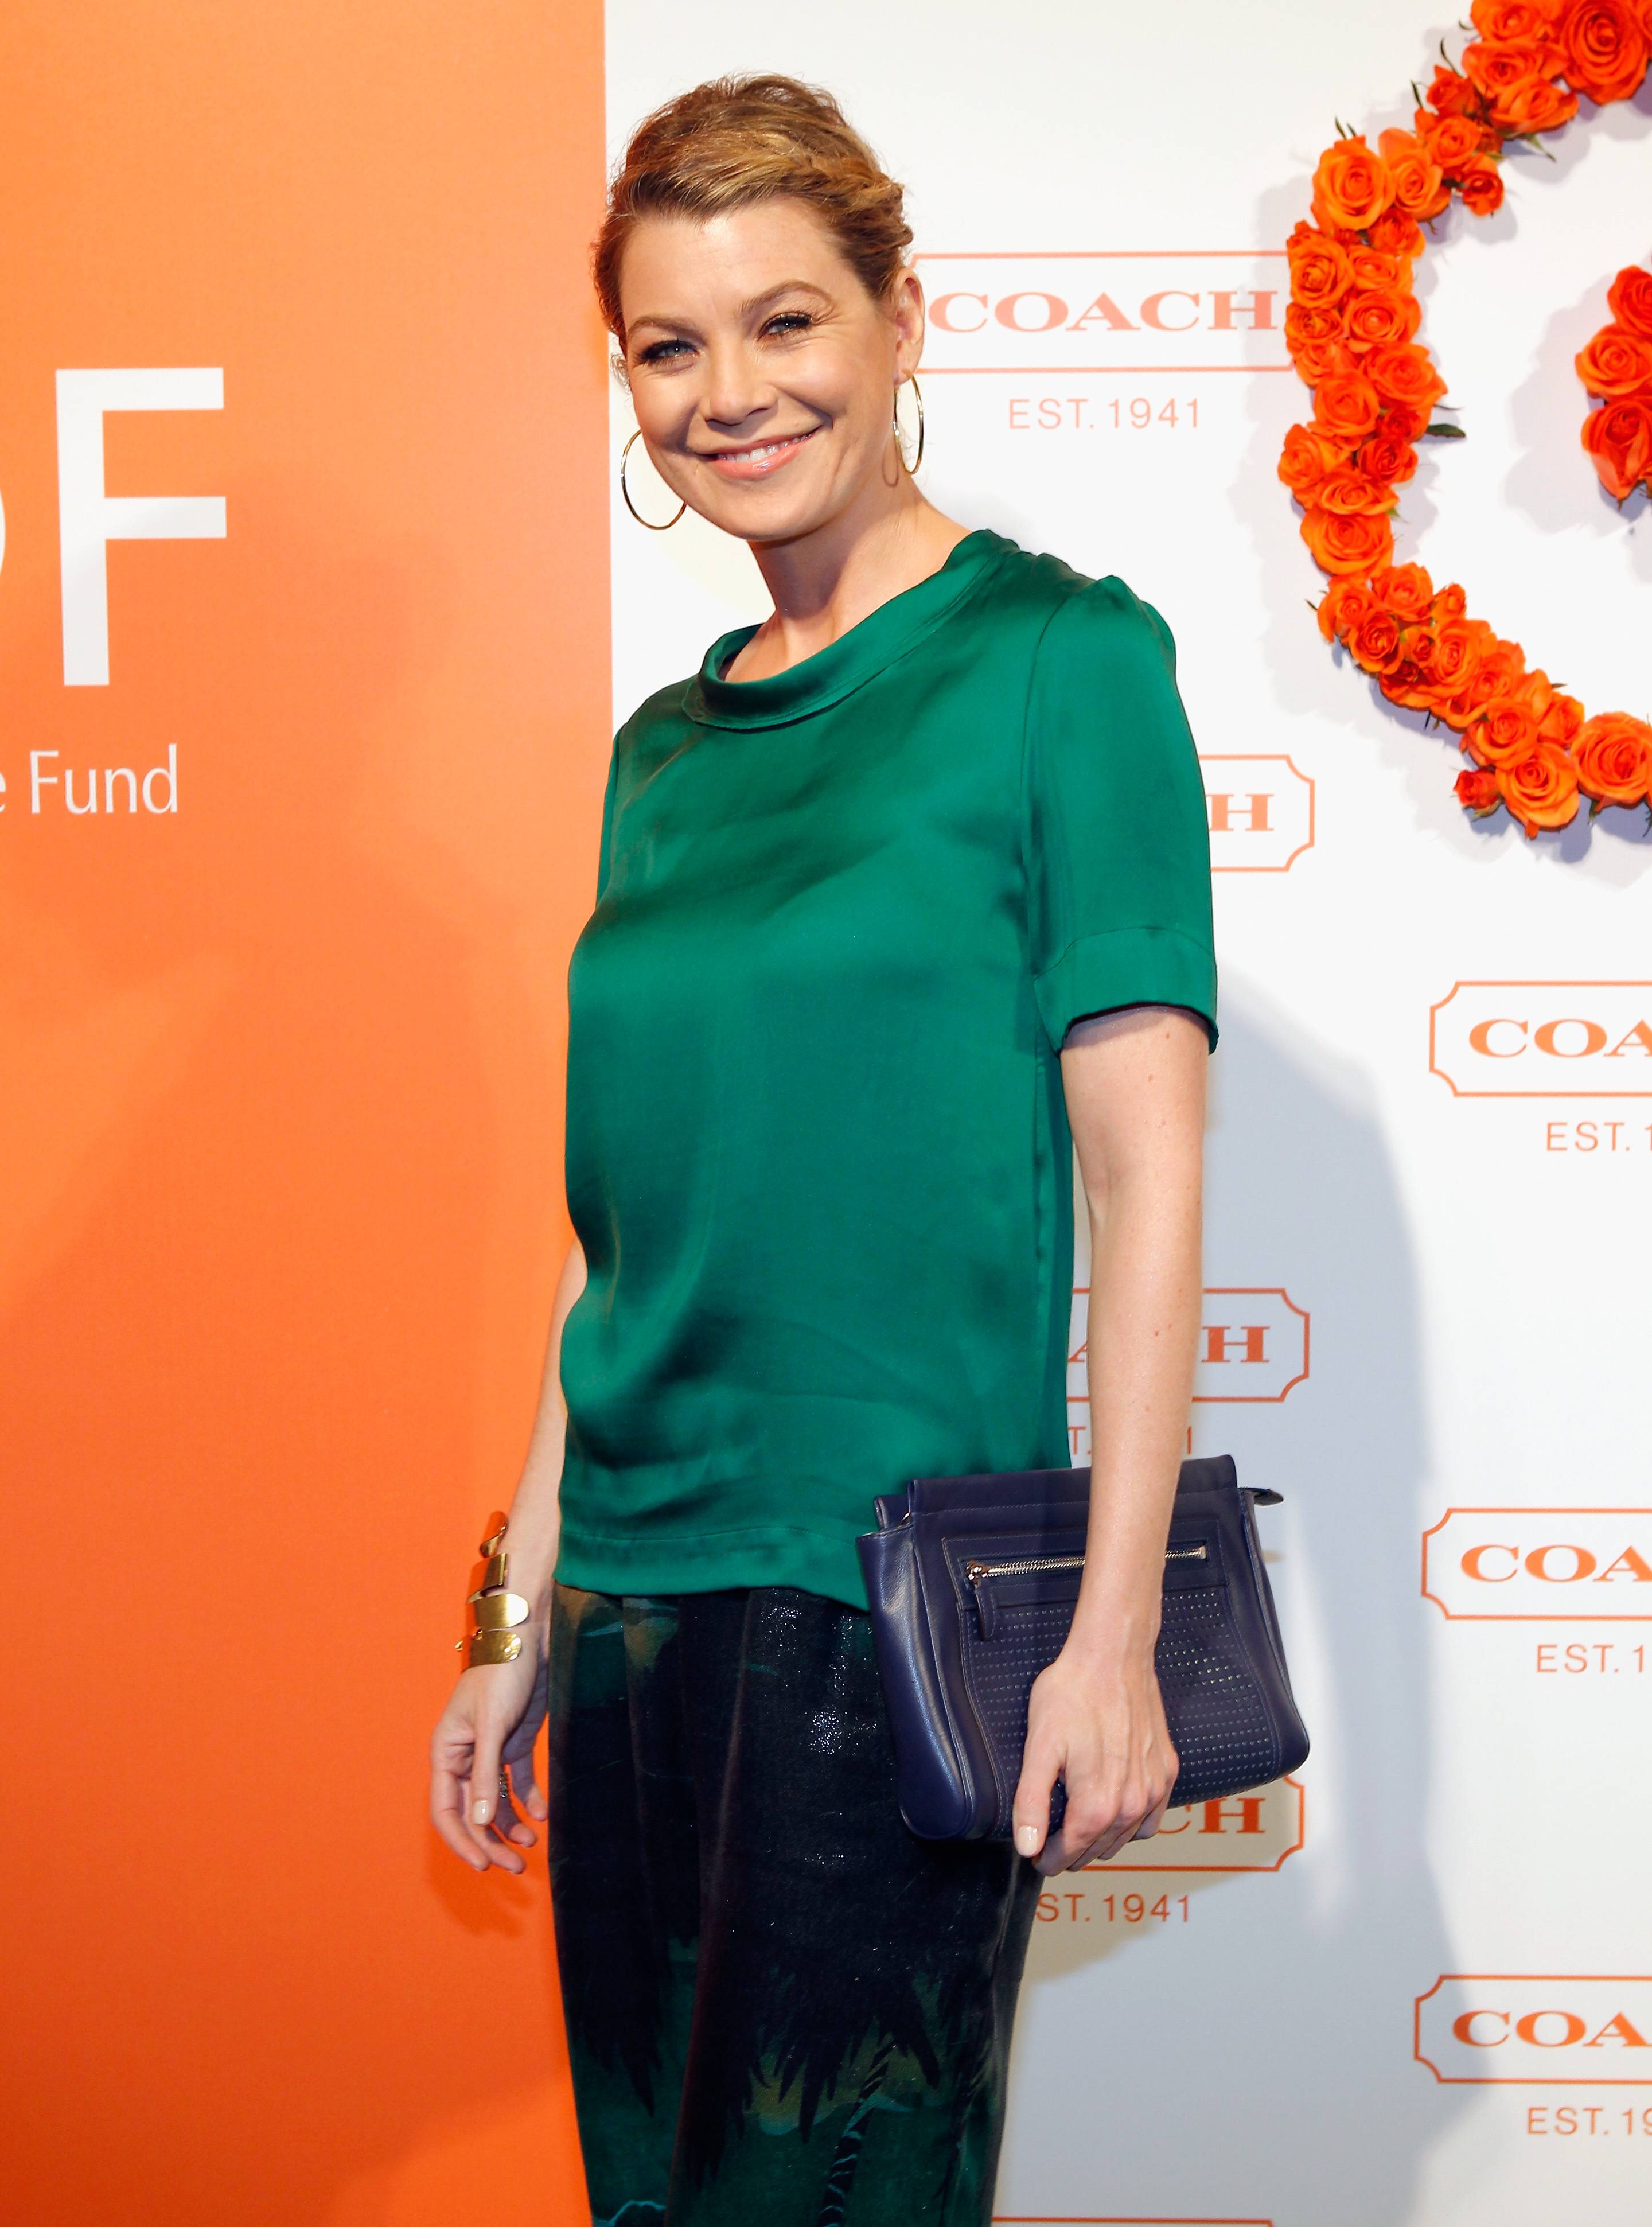 Coach 3rd Annual Evening Of Cocktails And Shopping To Benefit The Children's Defense Fund Hosted By Katie McGrath, J.J. Abrams and Bryan Burk